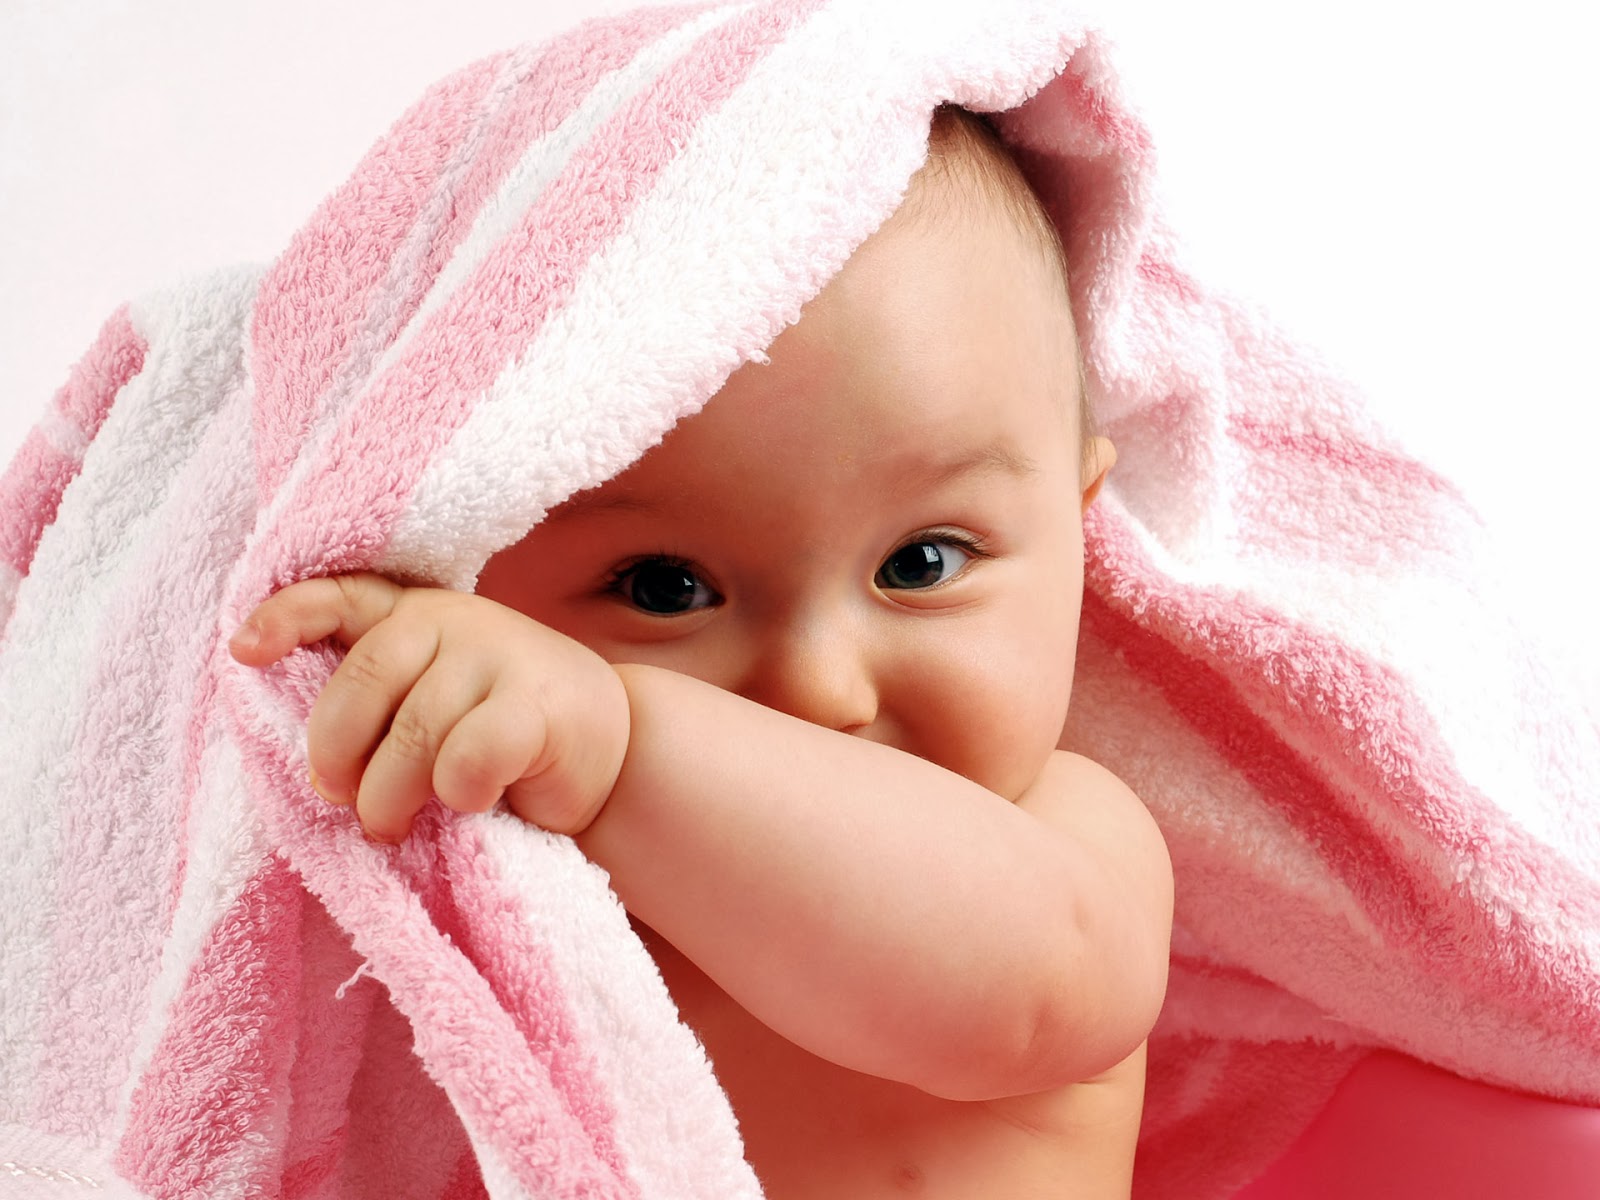 All 4u Hd Wallpaper Free Download Cute Baby Wallpapers Free Download